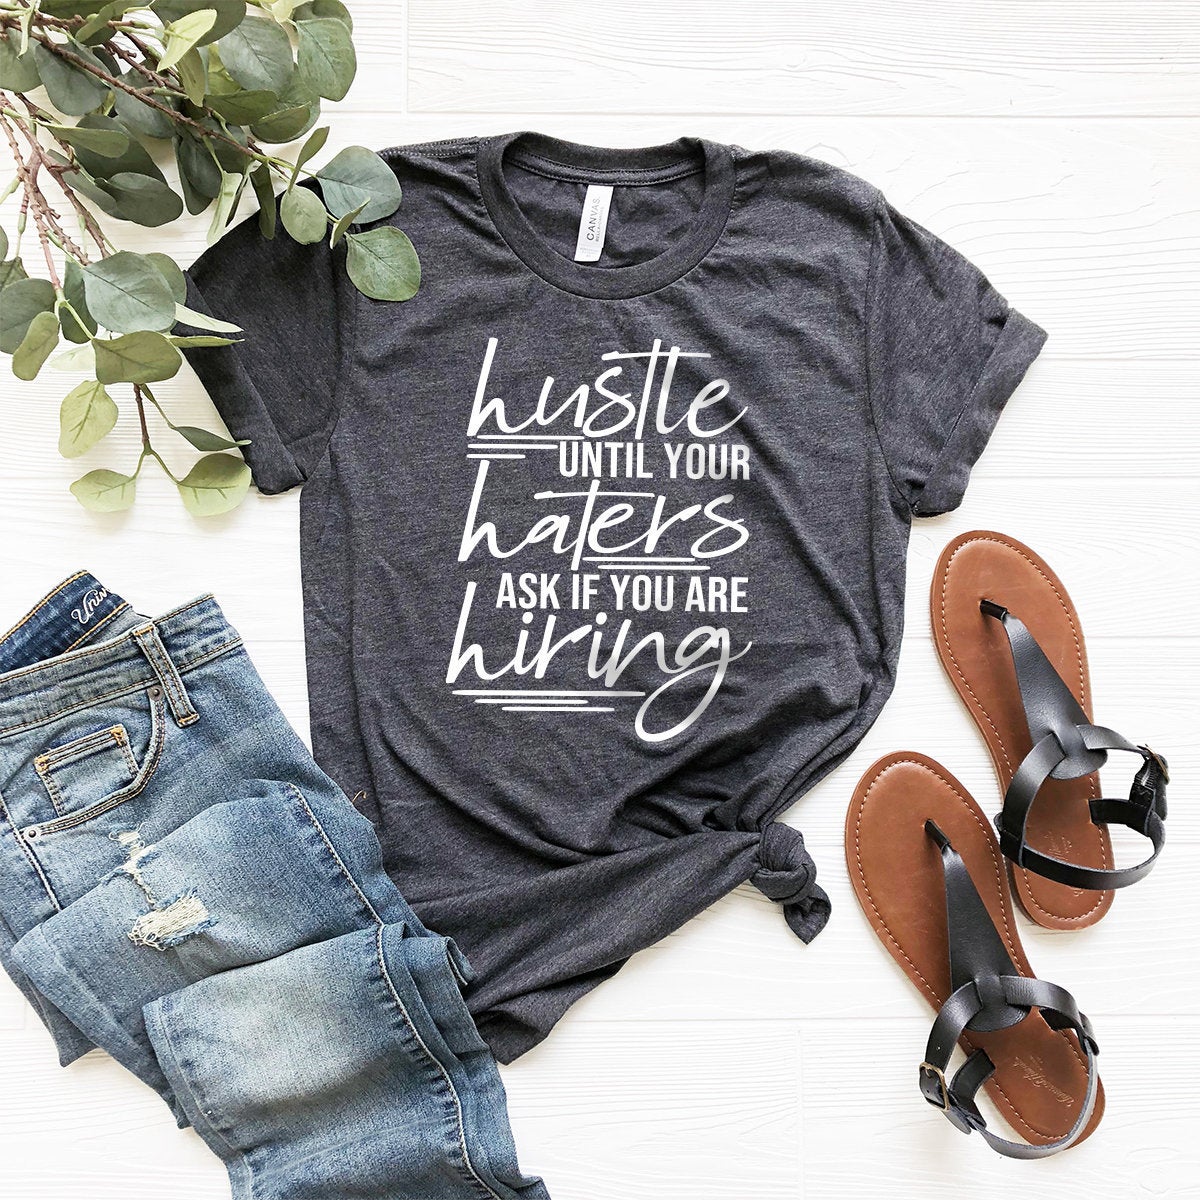 Hustle Hard Shirt, Girl Boss Shirt, Haters Gonna Hate Shirt Hustle Until Your Haters Ask If You Are Hiring Shirt, Run This Shirt, Hustle Tee - Fastdeliverytees.com